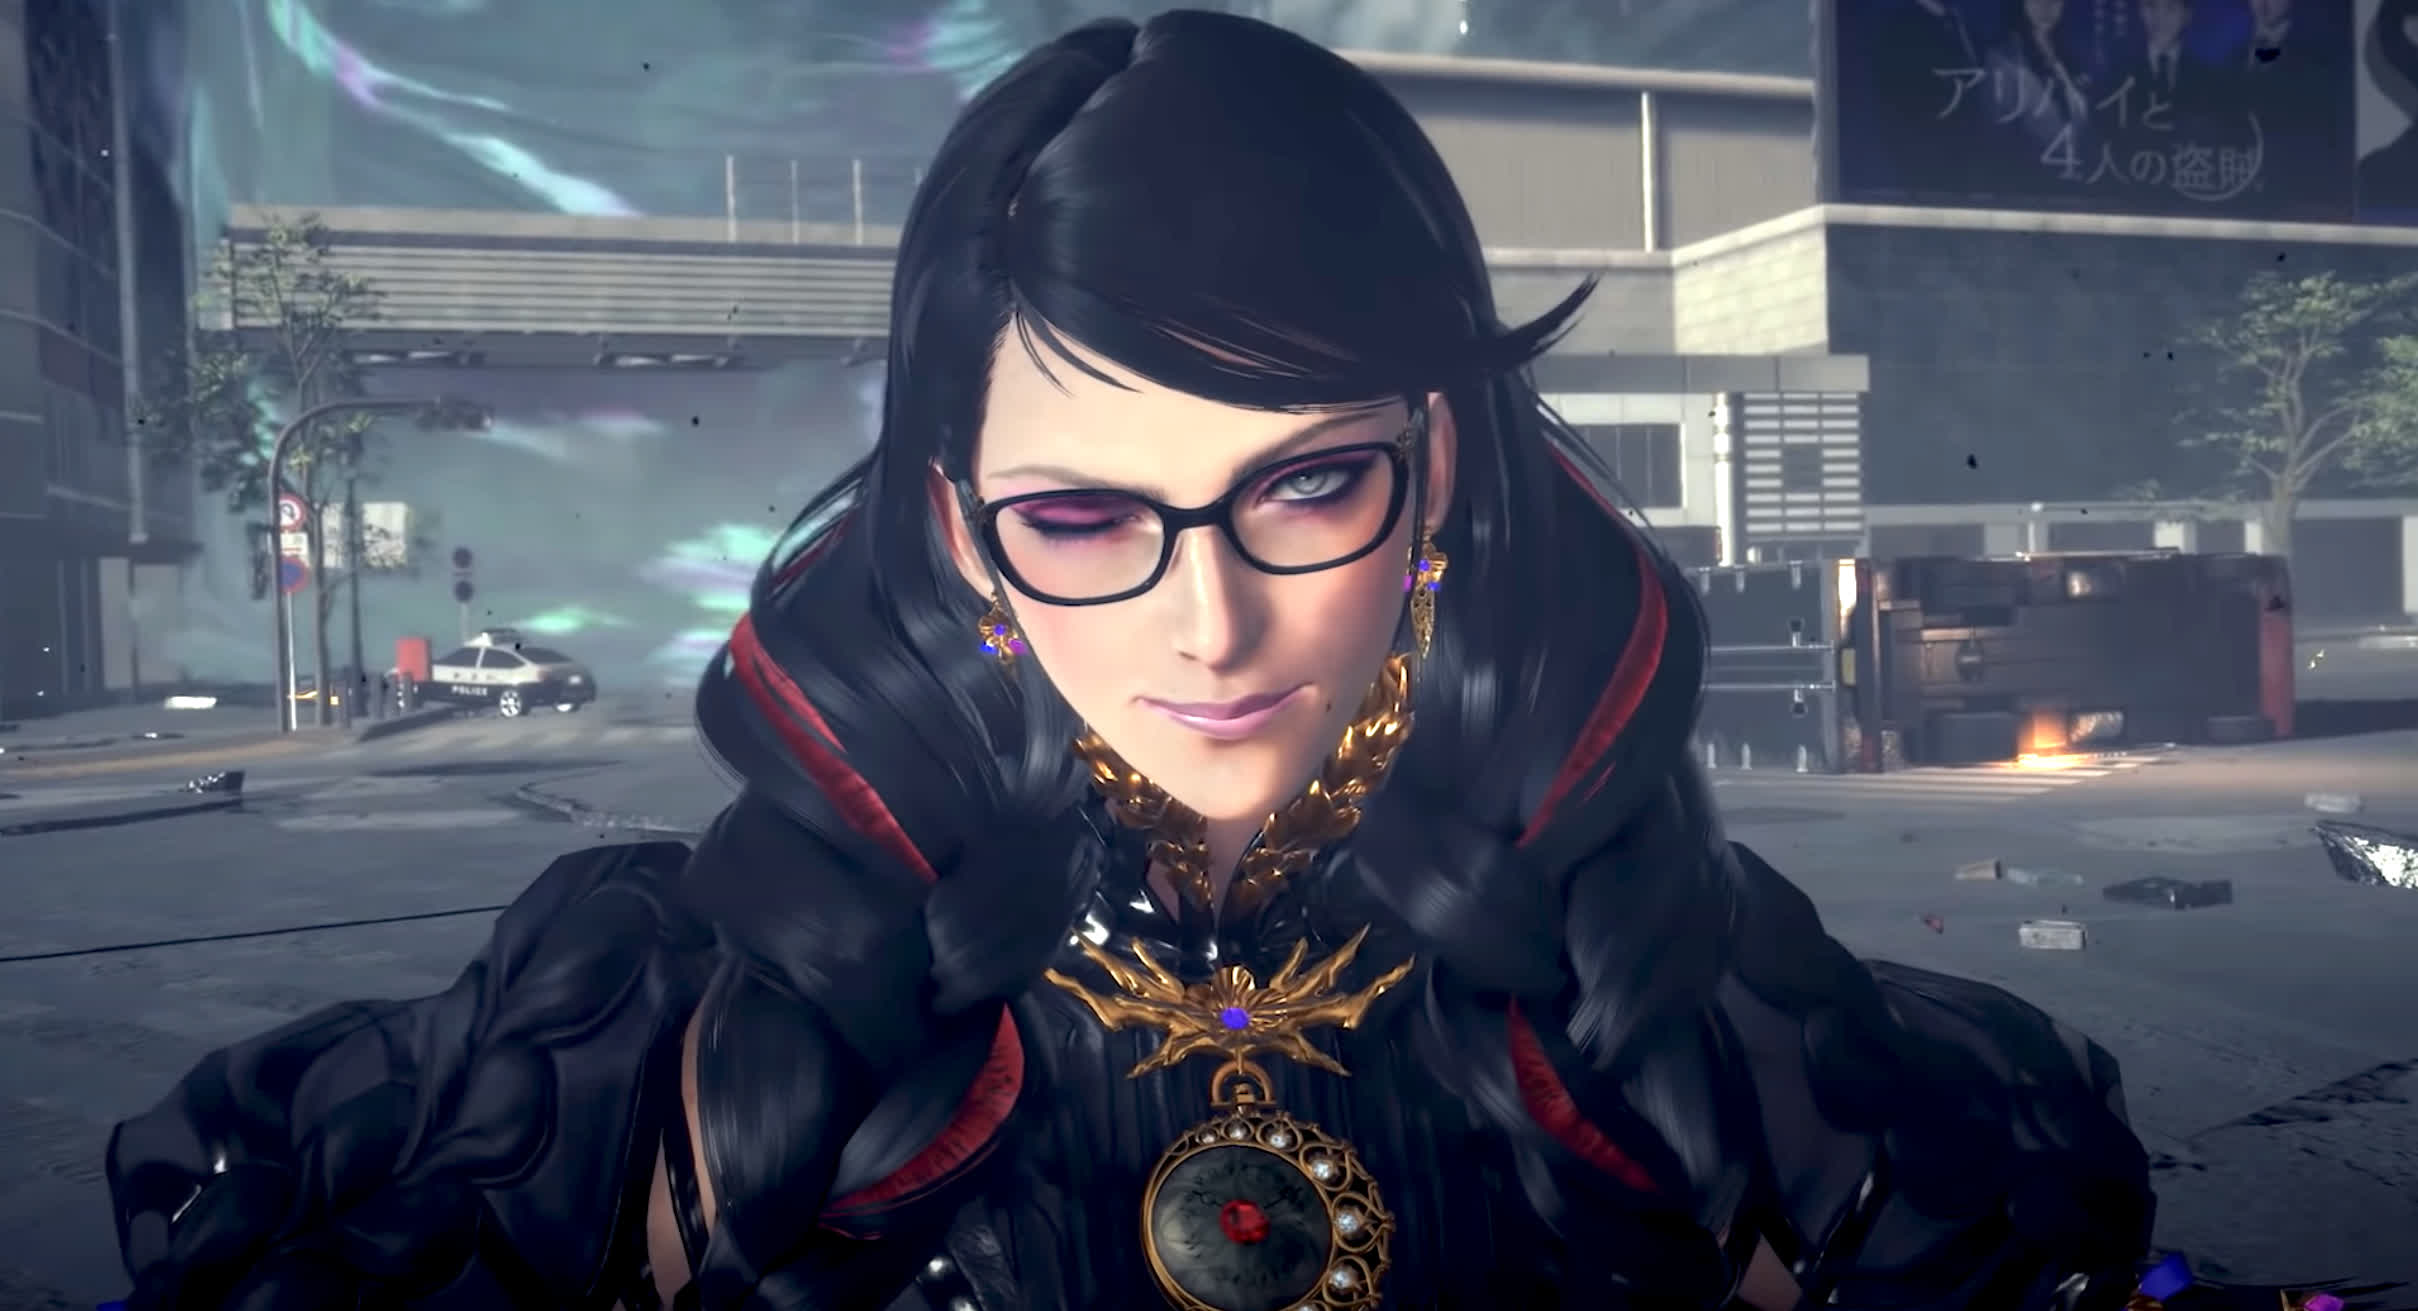 Platinum Games drops Bayonetta 3 gameplay trailer after four years of radio silence